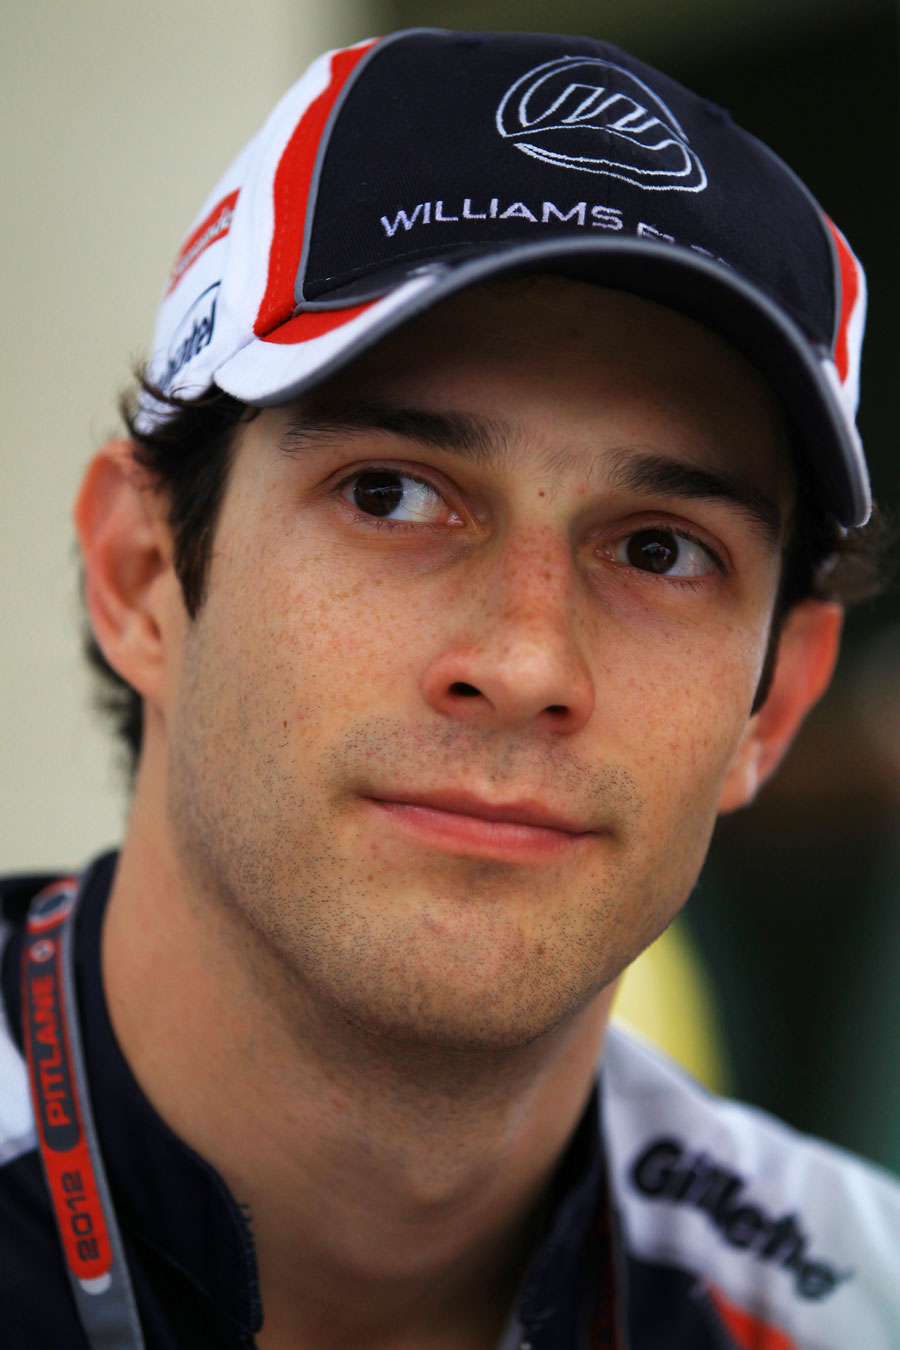 Bruno Senna talks to the press after qualifying